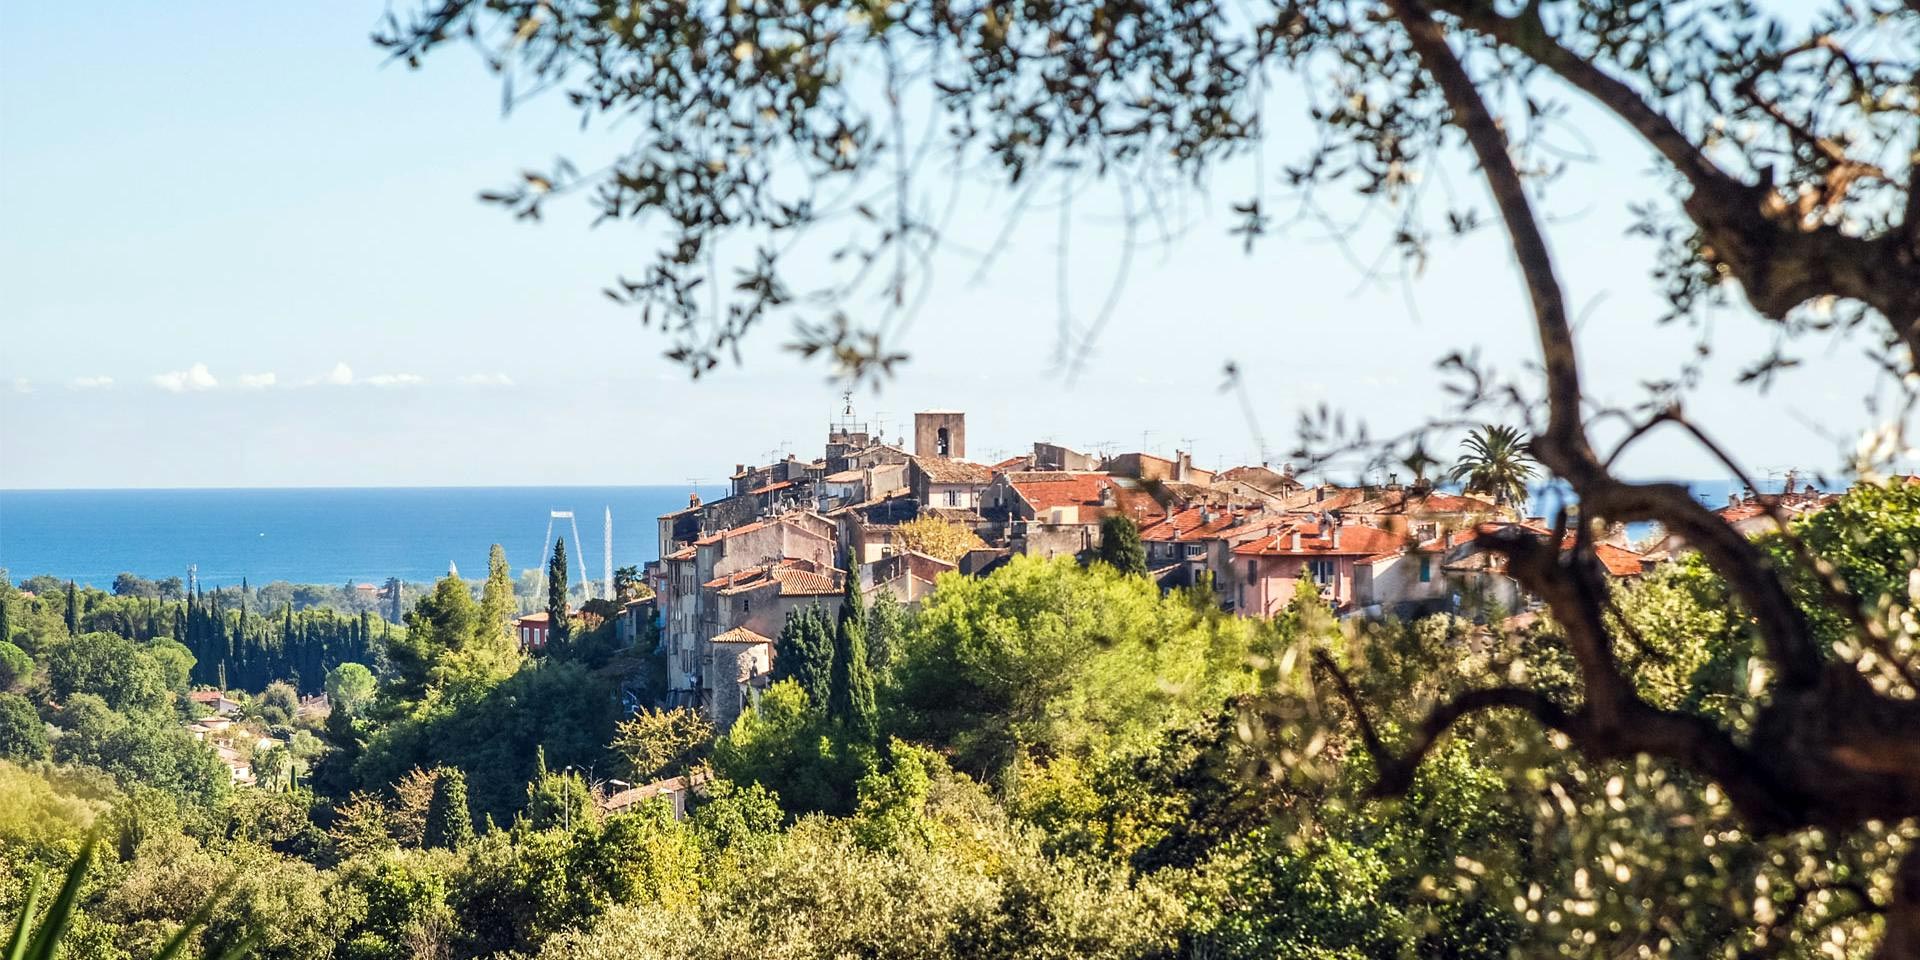 The Hilltop Village of Biot - The start of this hike